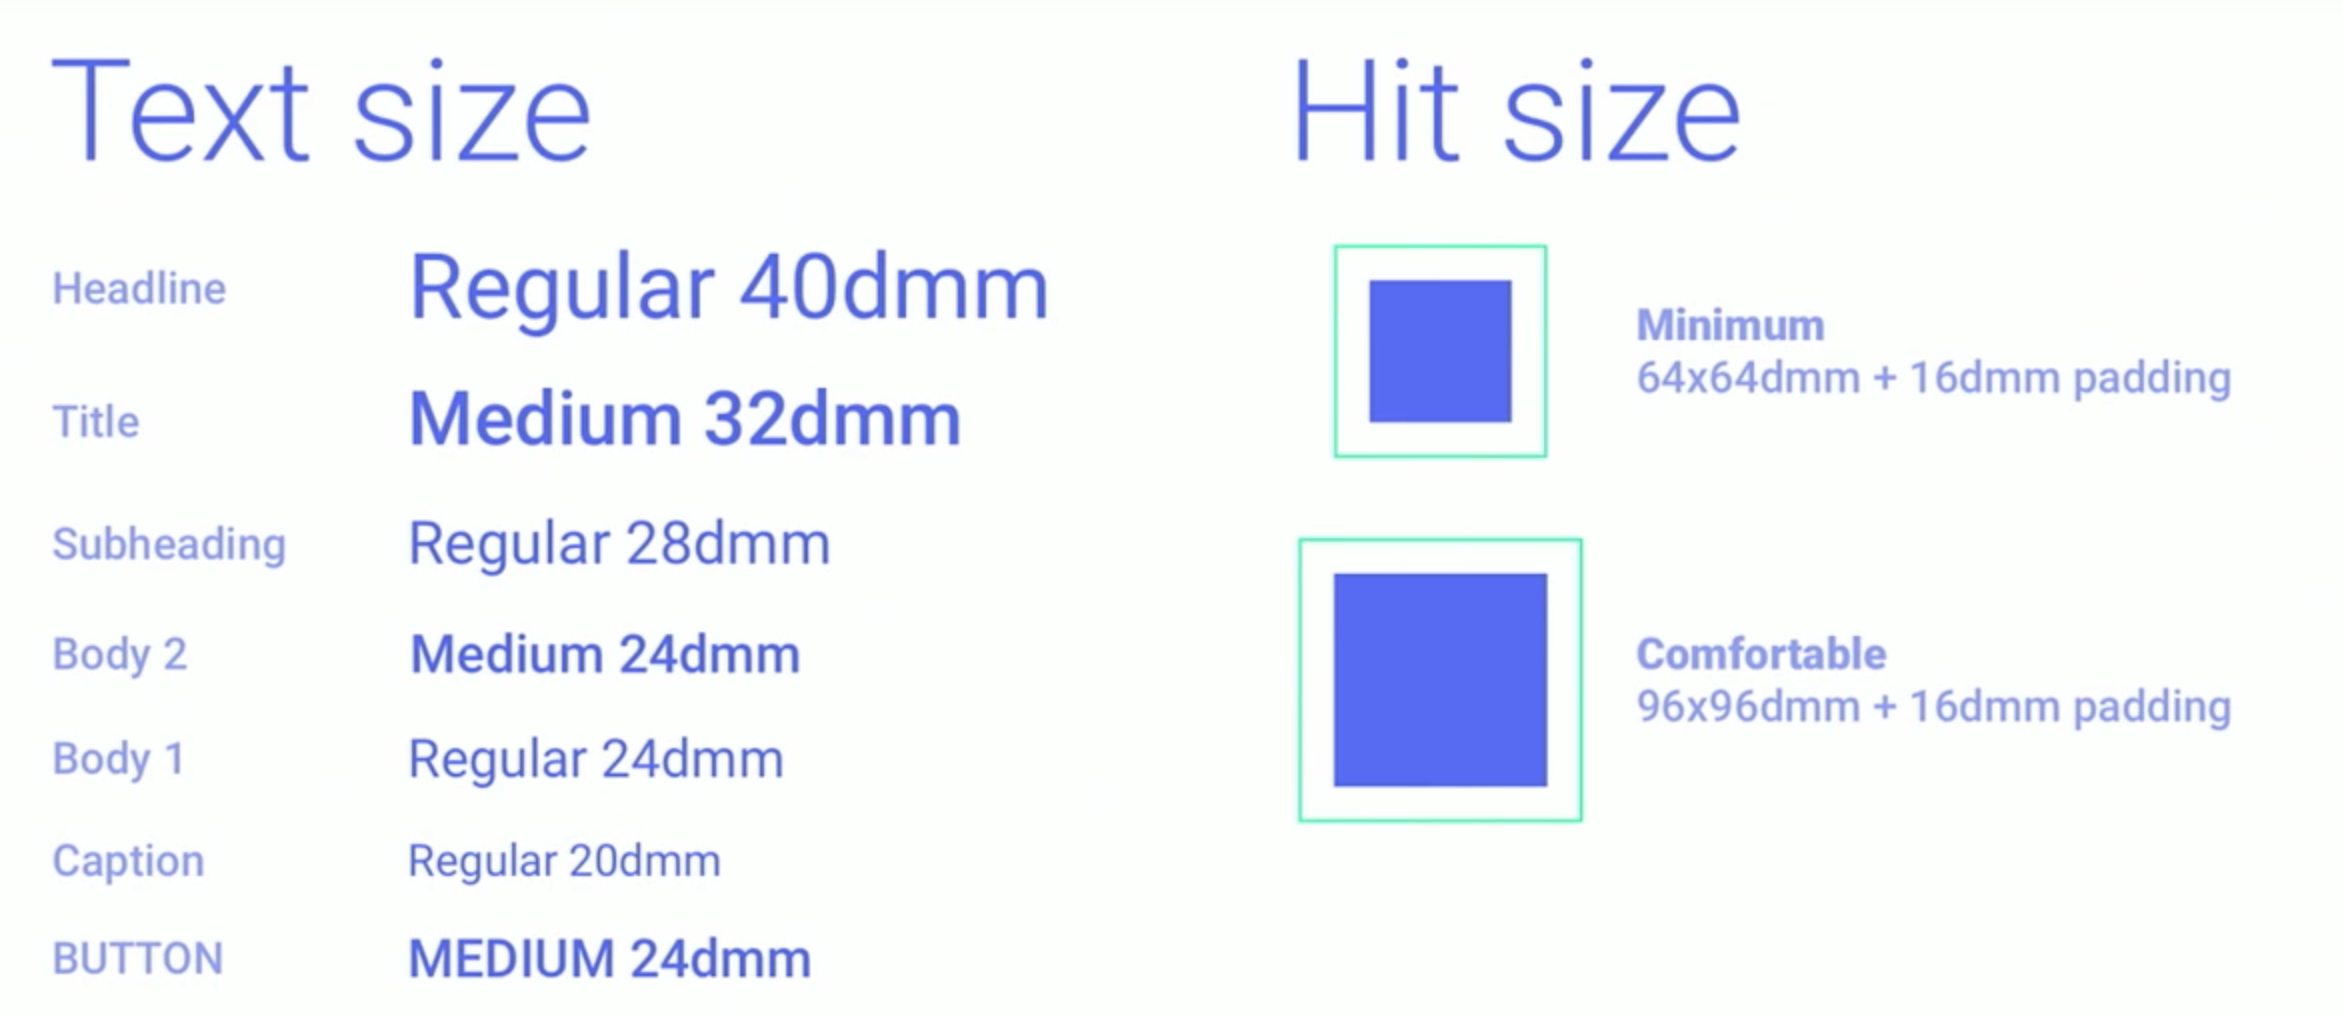 An example of Google's guidelines for various text sizes and hit sizes